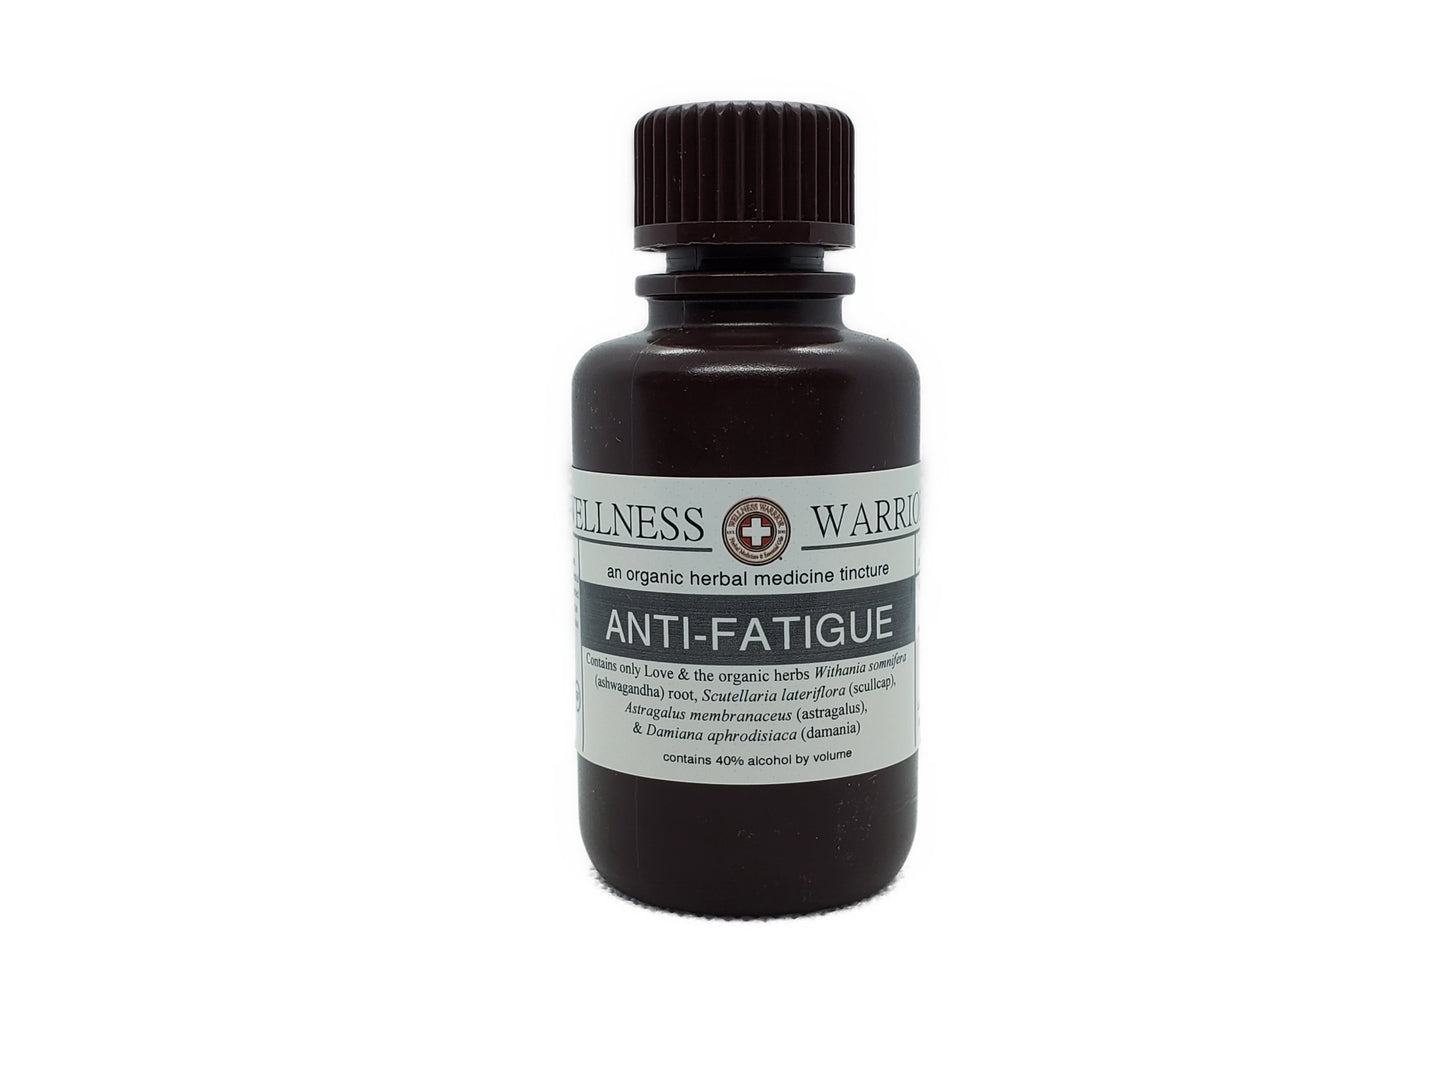 Antifatigue Herbal Tincture - First Aid for Fatigue